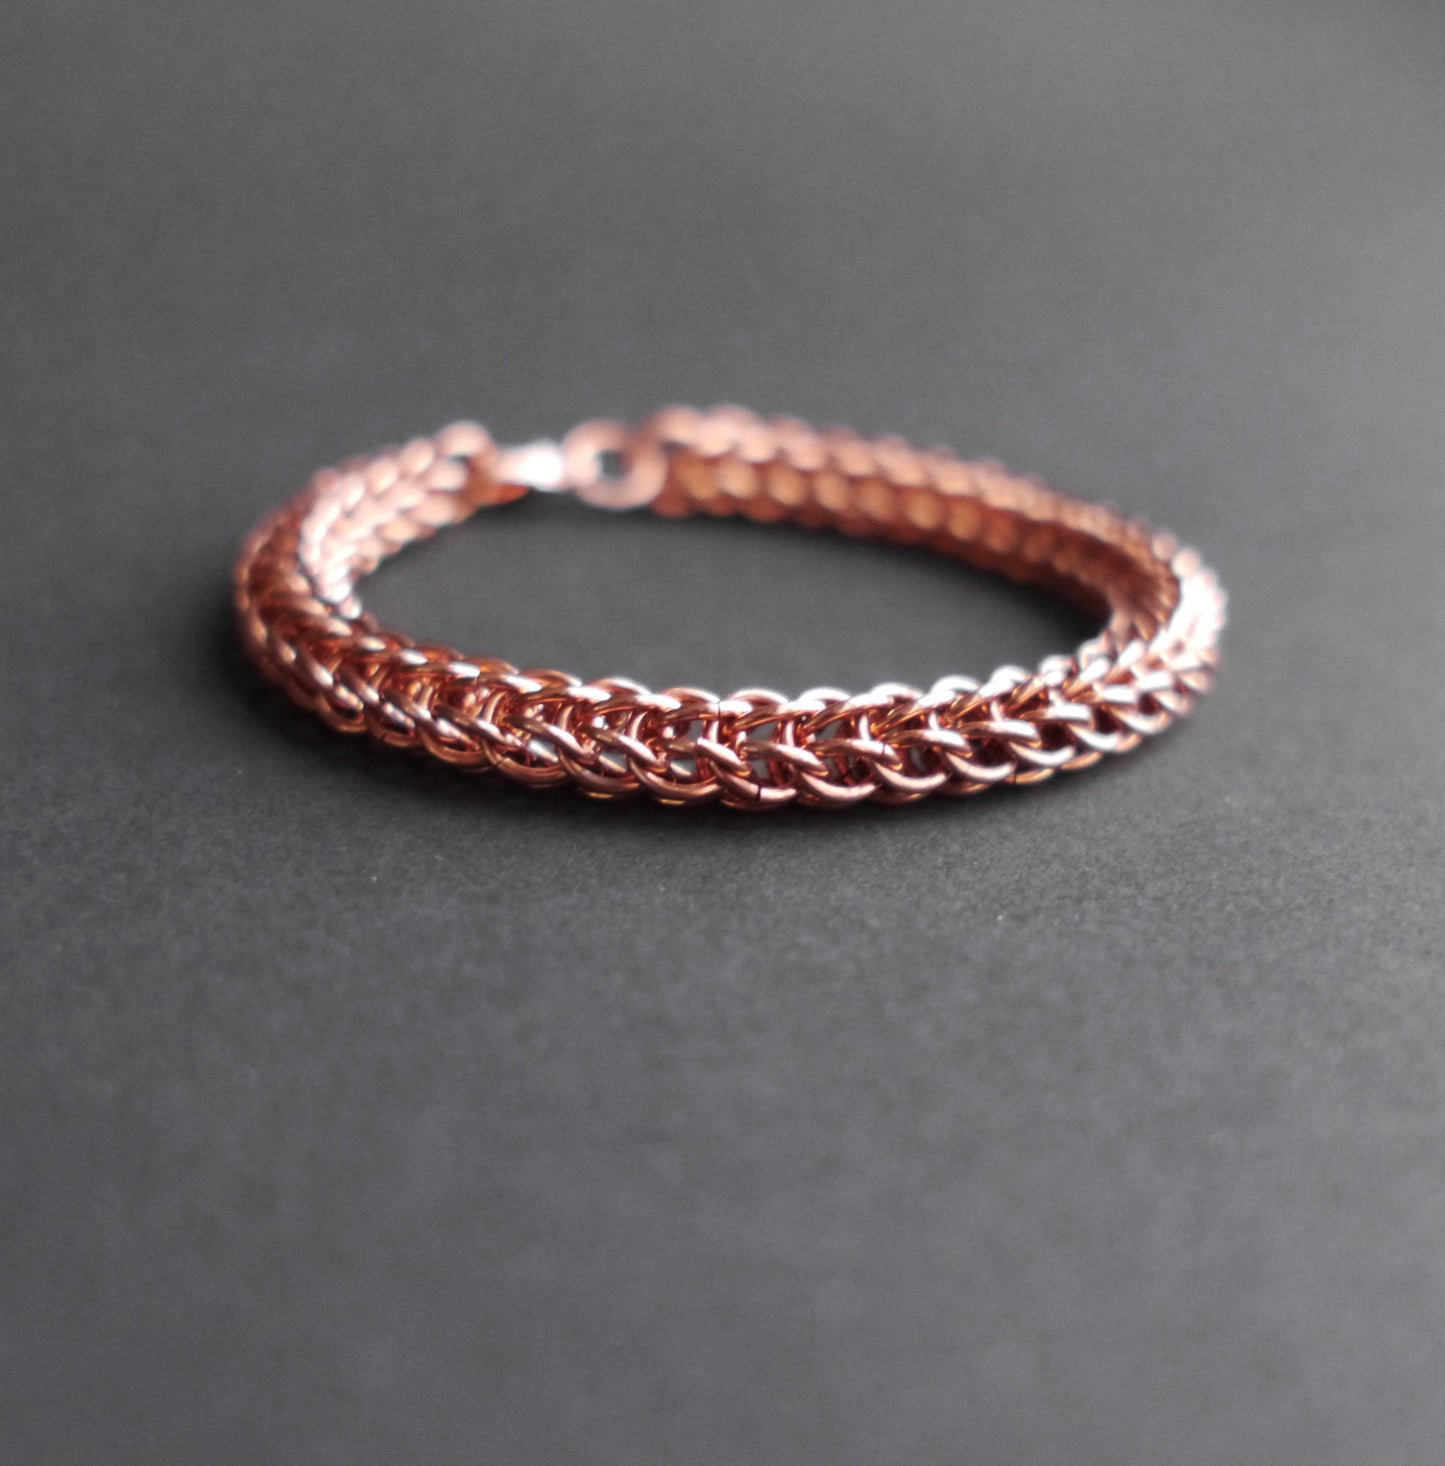 8mm Full Persian Chainmaille Bracelet in Copper